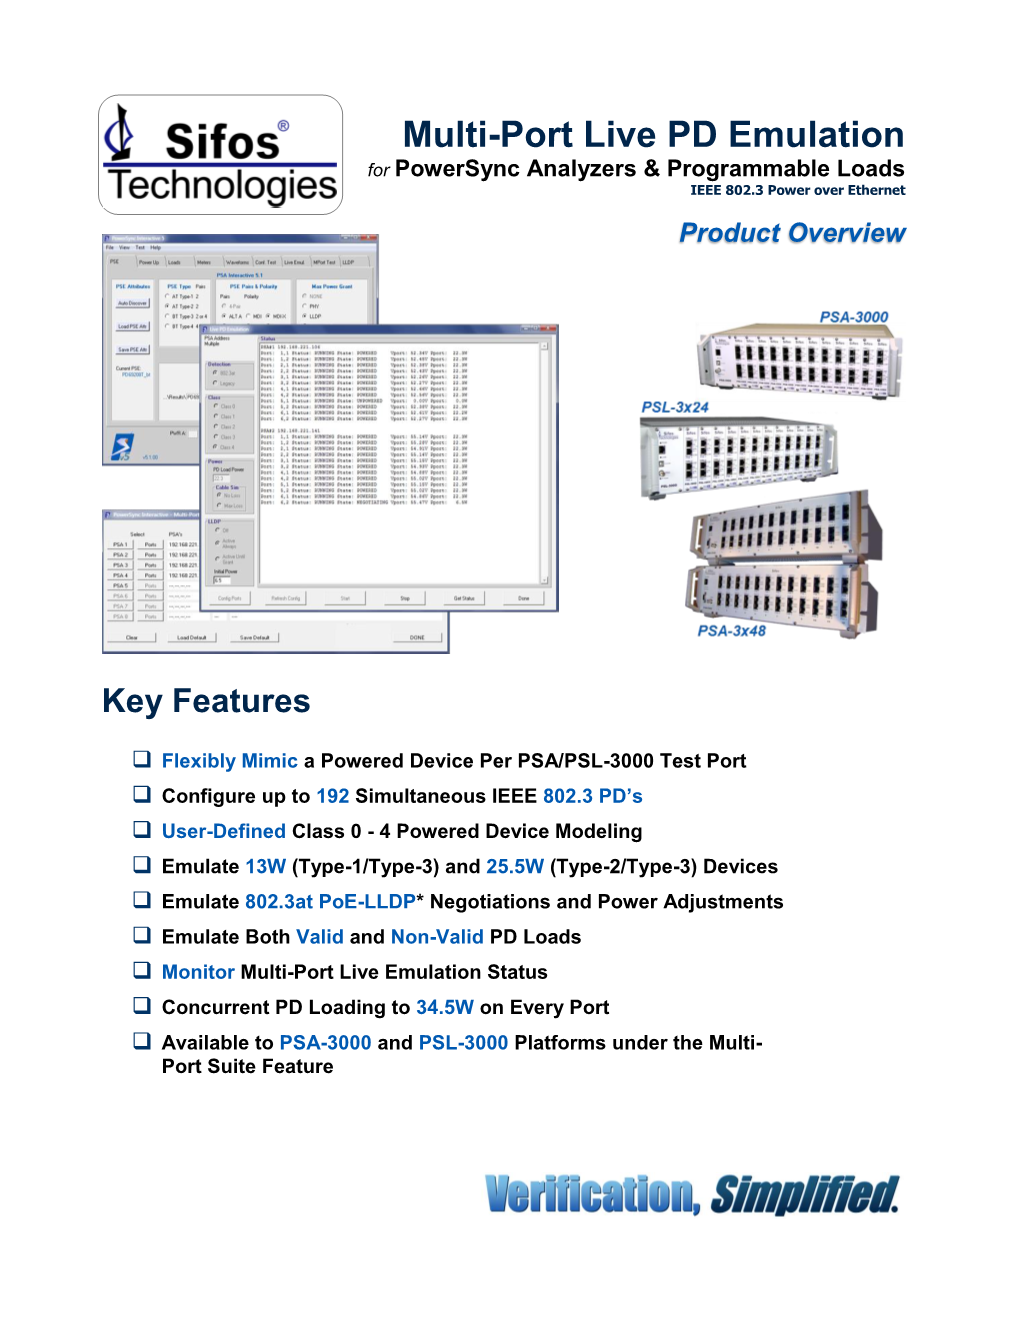 Live PD Emulation for Powersync Analyzers & Programmable Loads IEEE 802.3 Power Over Ethernet